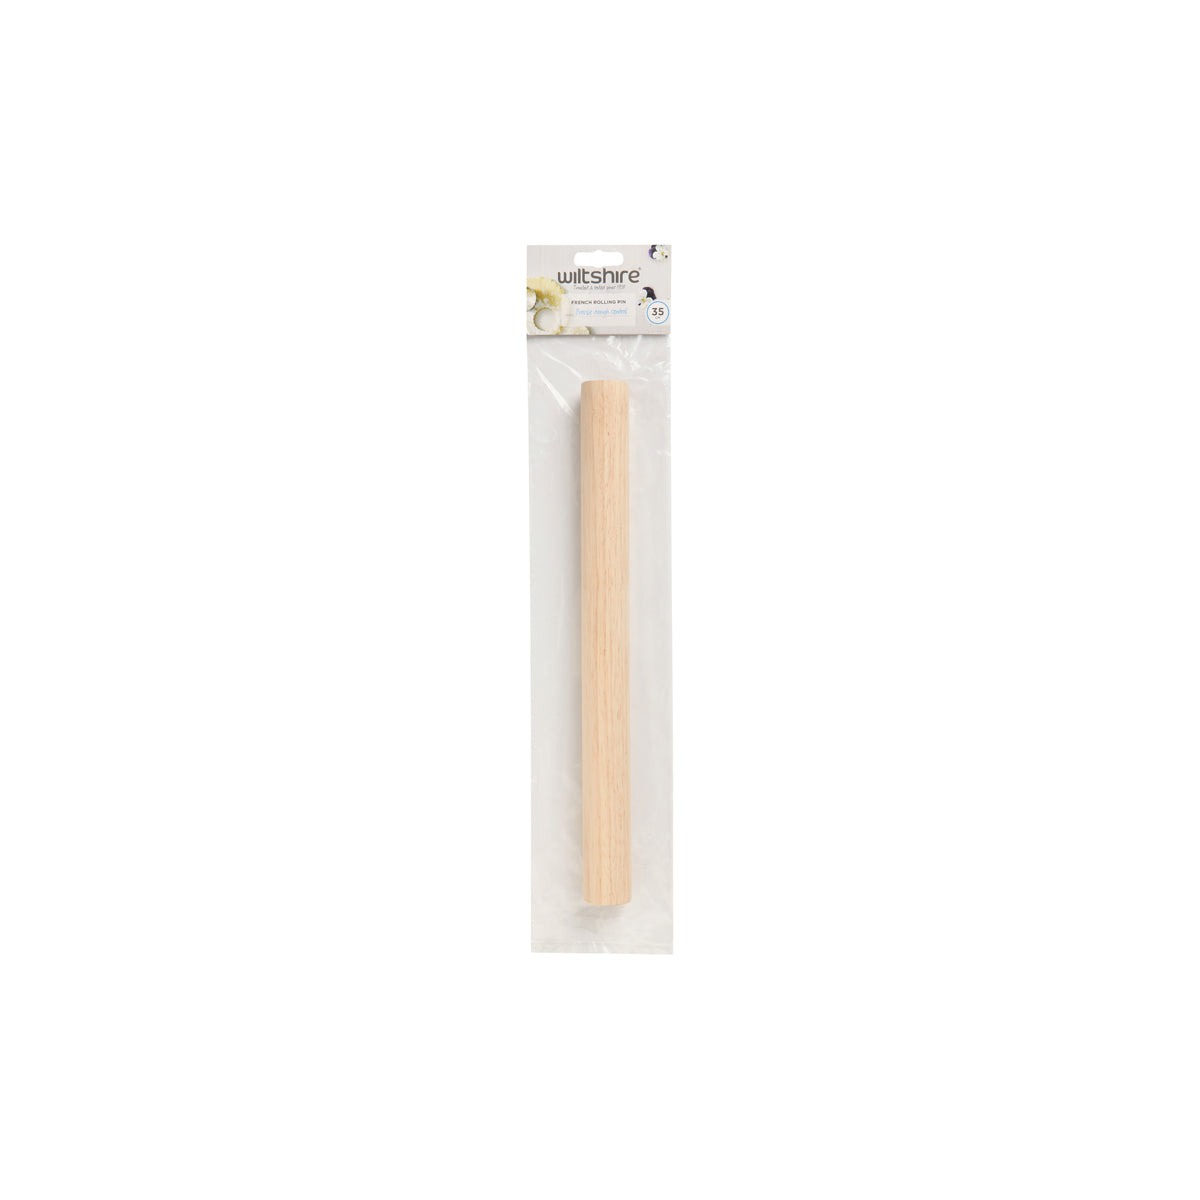 WLT44015 WILTSHIRE French Rolling Pin Tomkin Australia Hospitality Supplies